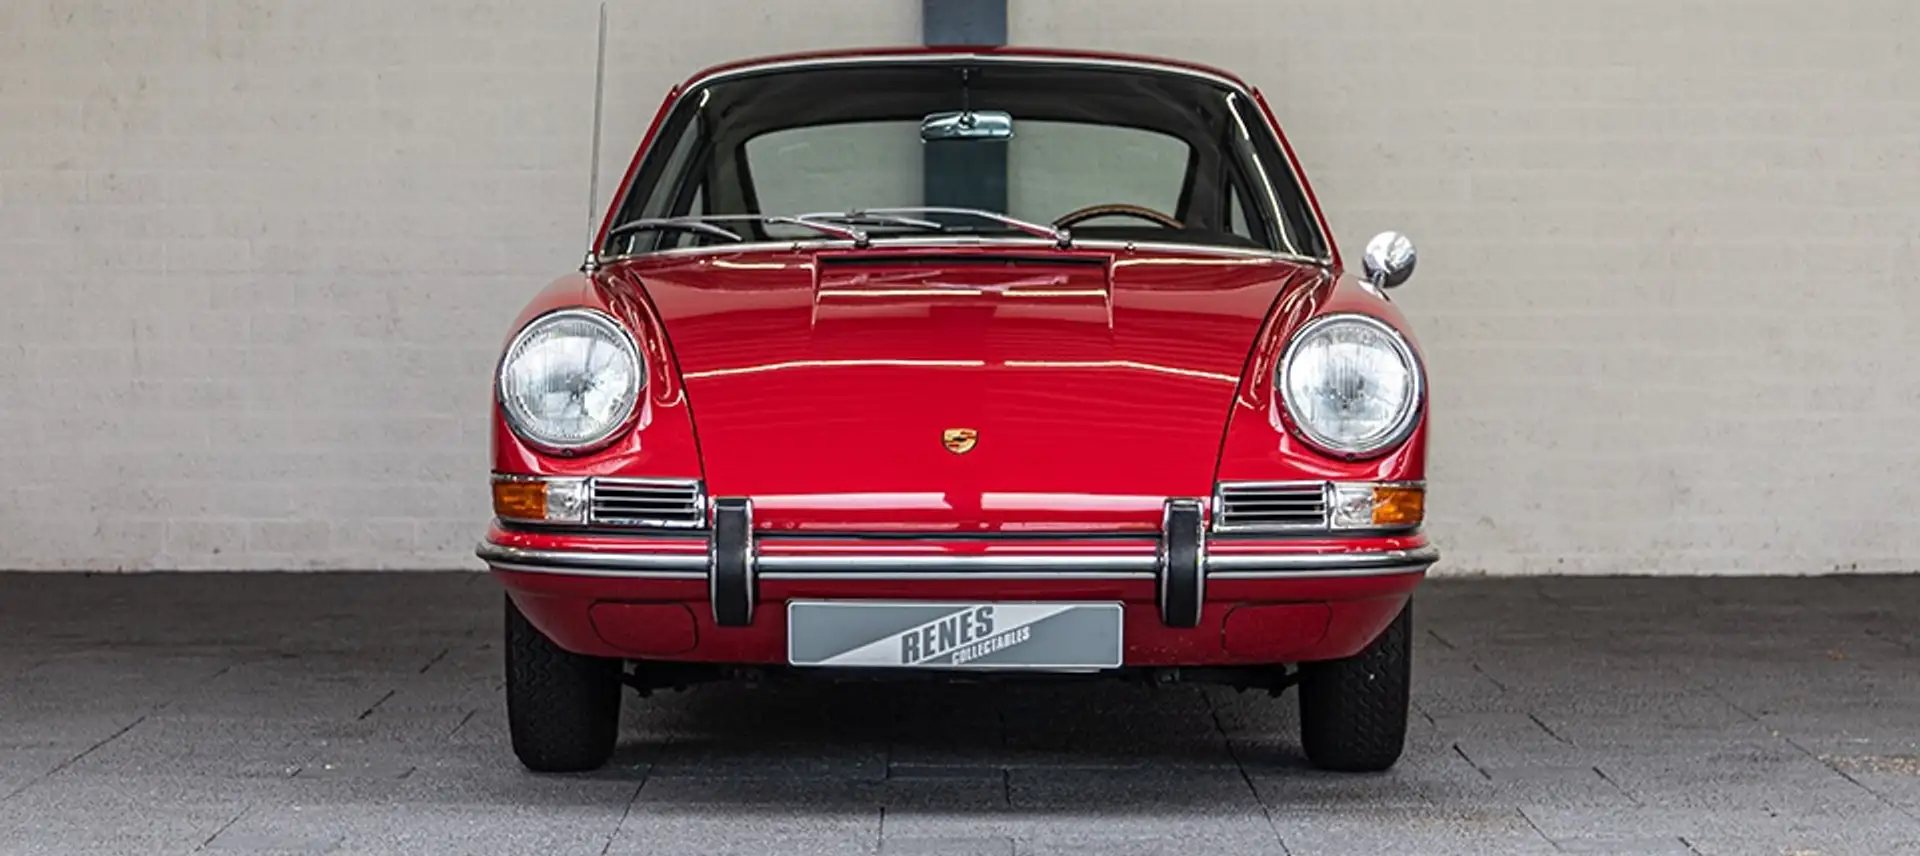 Porsche 911 1965 911 Matching Numbers German first delivery Rouge - 2